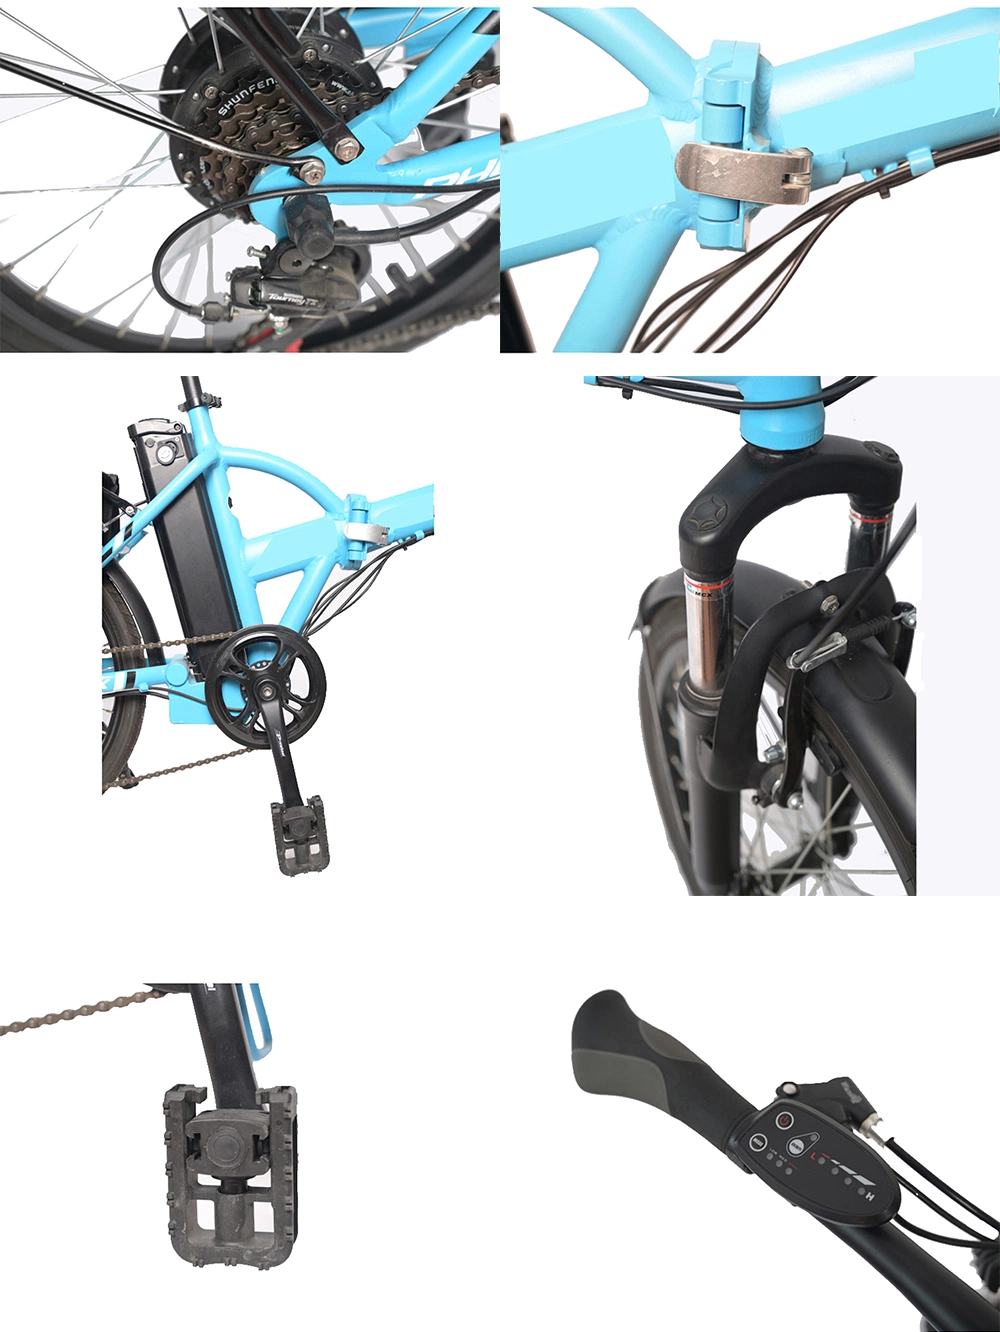 Electric Bicycle 20inch/Electric Bicycle Adult/Electric Bicycle 48V 500W